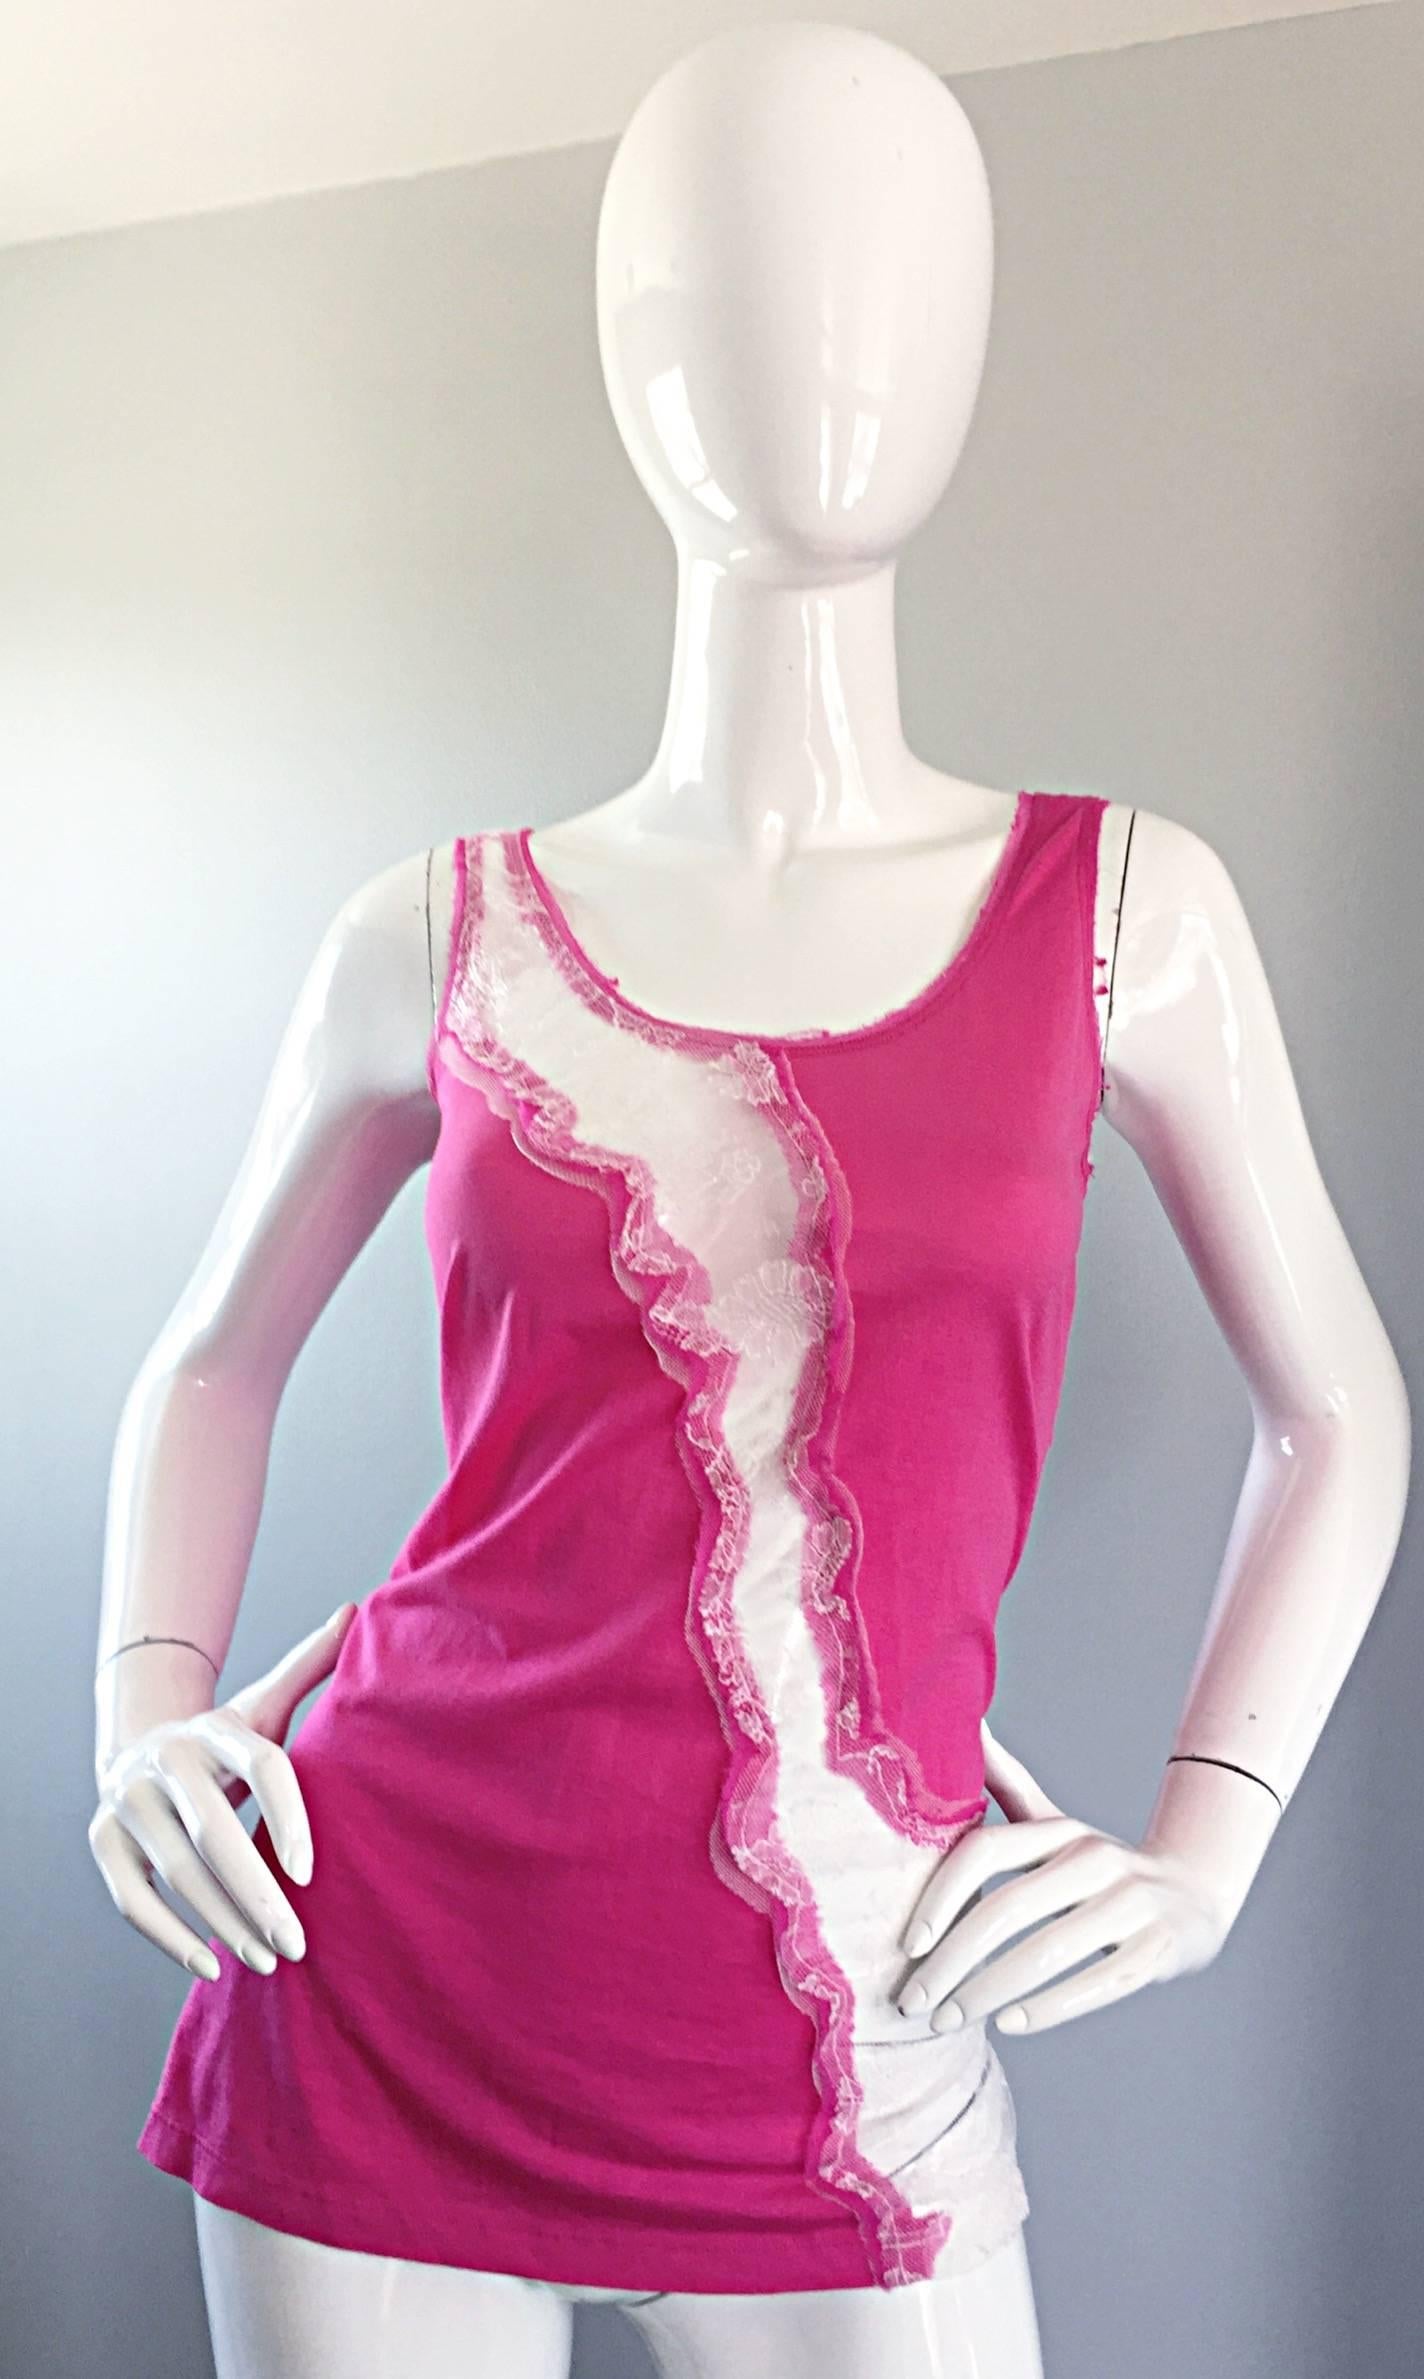 Sexy 2000s JOHN GALLIANO hot pink / fuchsia and white sleeveless top with an asymmetrical lace cut-out down the bodice! Reveals just the right amount of skin. Looks great with shorts, jeans, trousers, or a skirt. In great condition. Made in Italy.